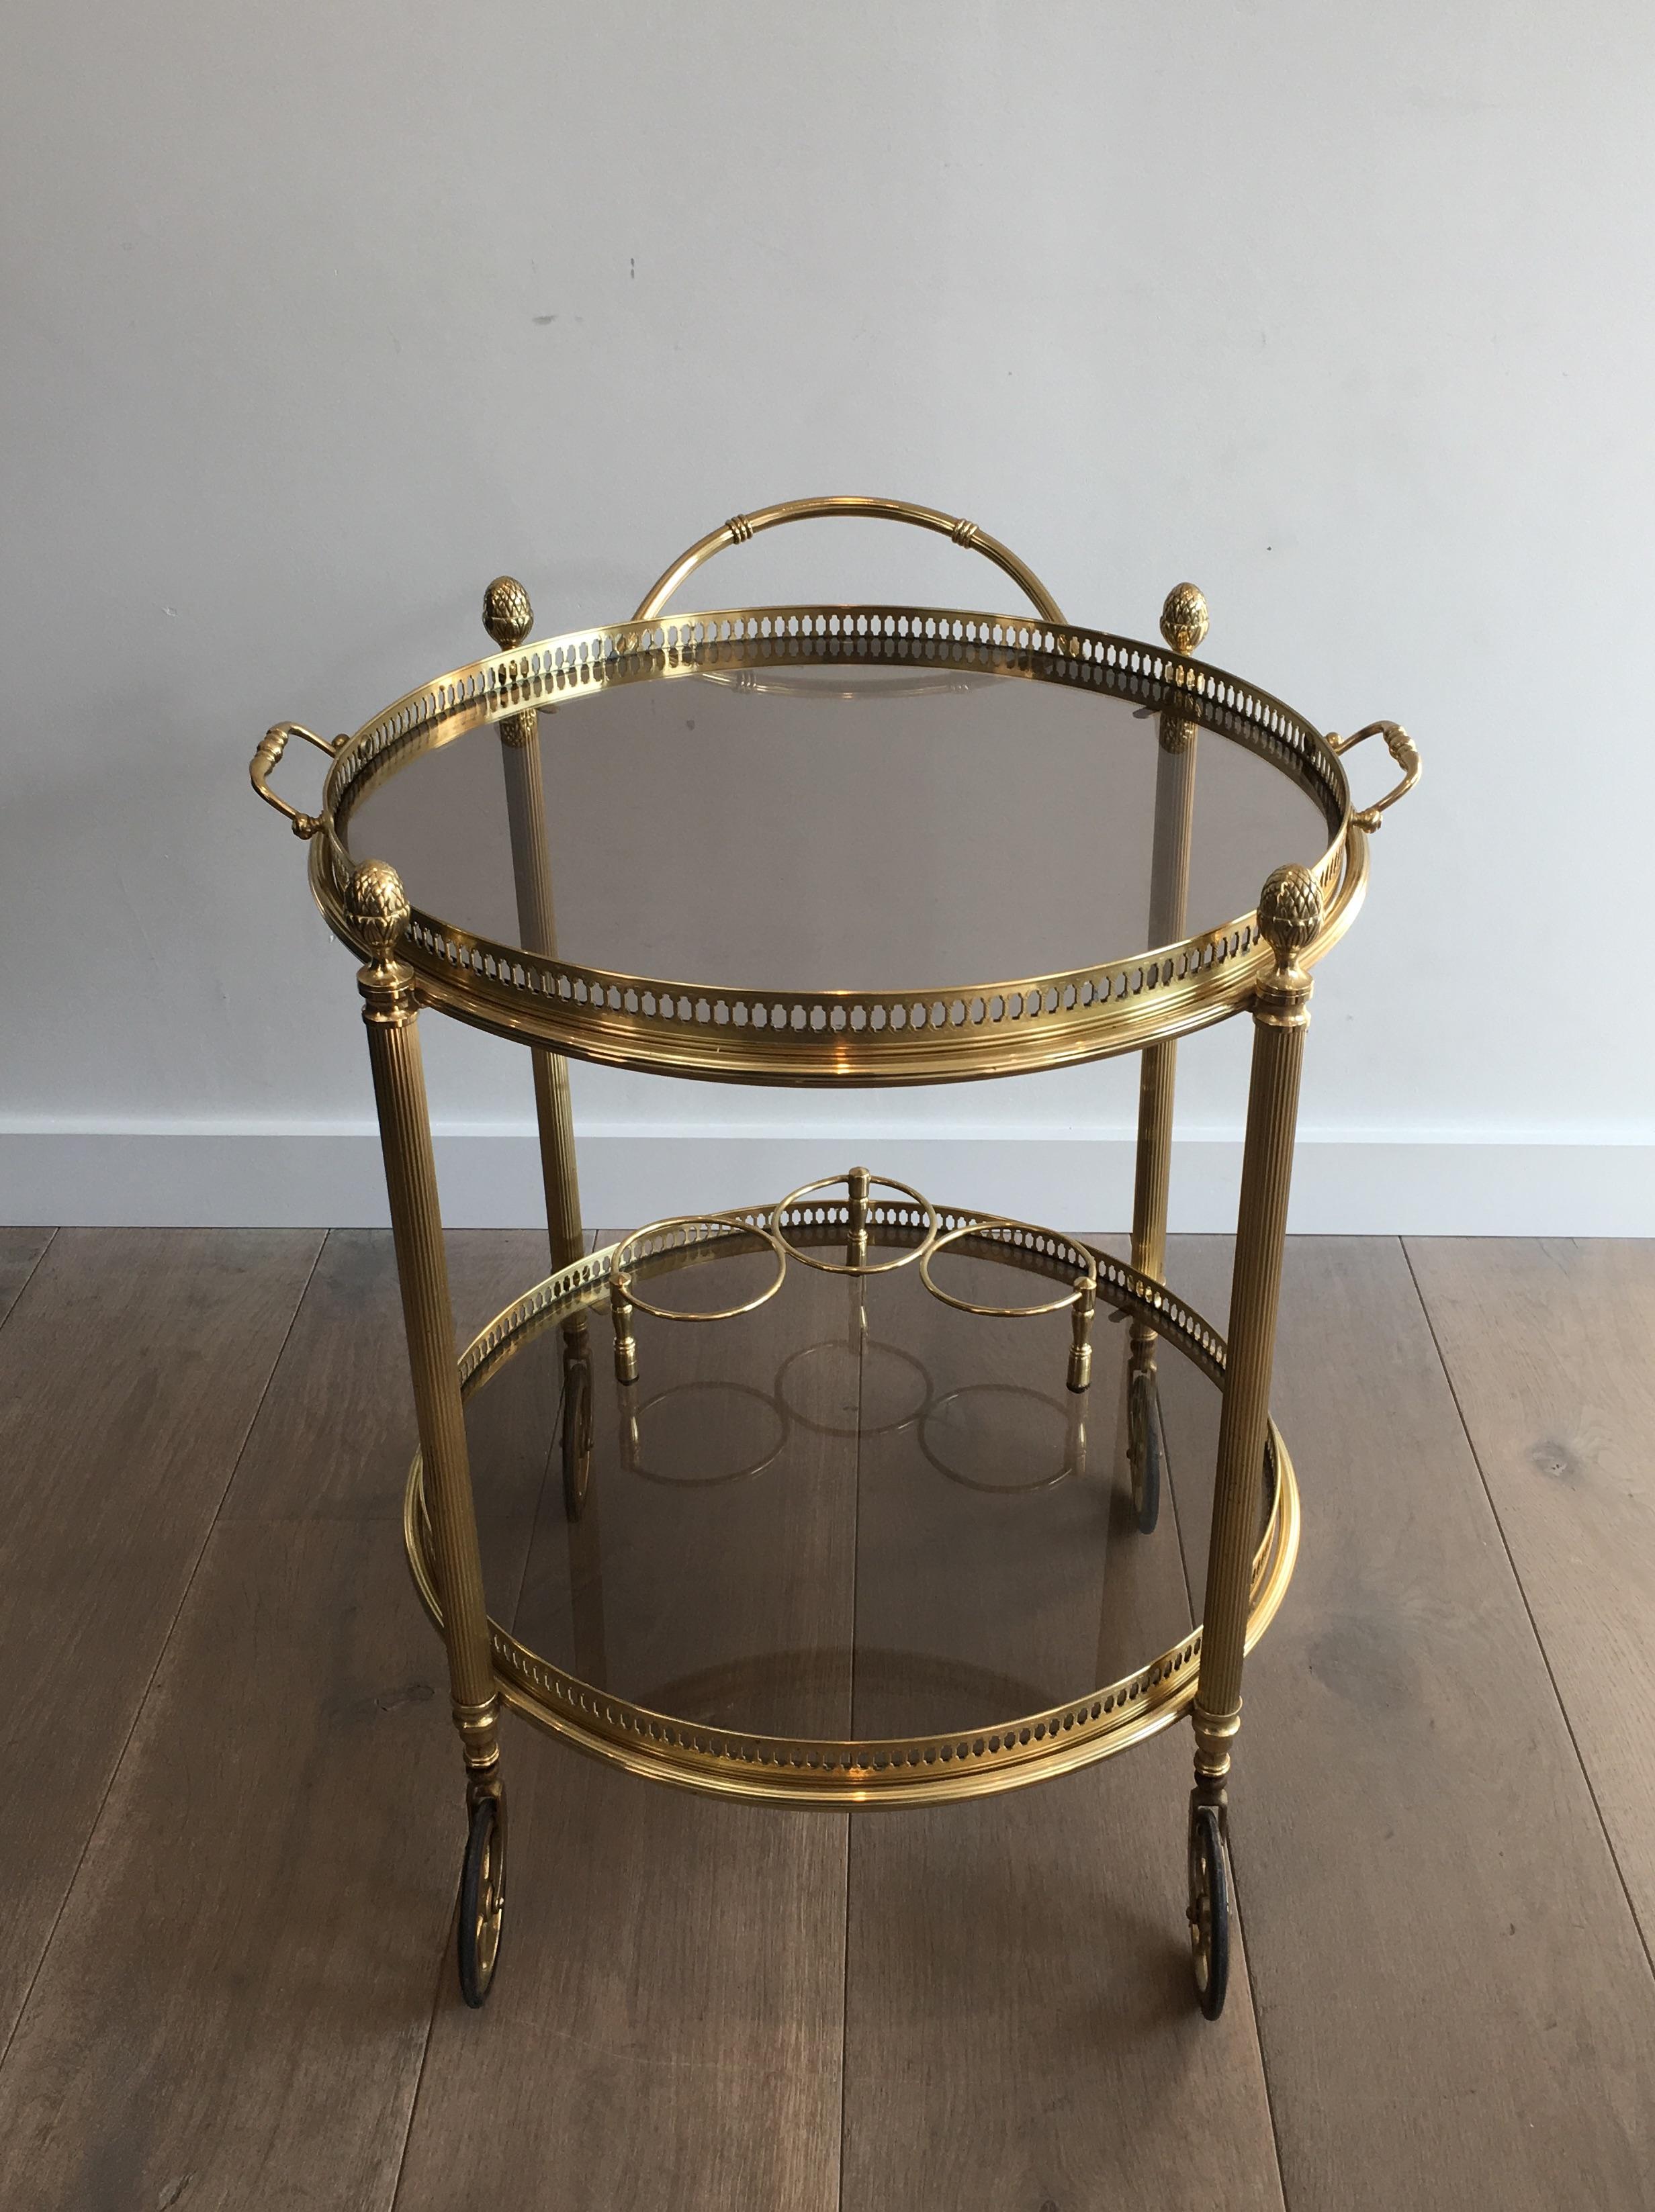 Mid-Century Modern Maison Bagués, Neoclassical Round Brass Drinks Trolley, French, circa 1940